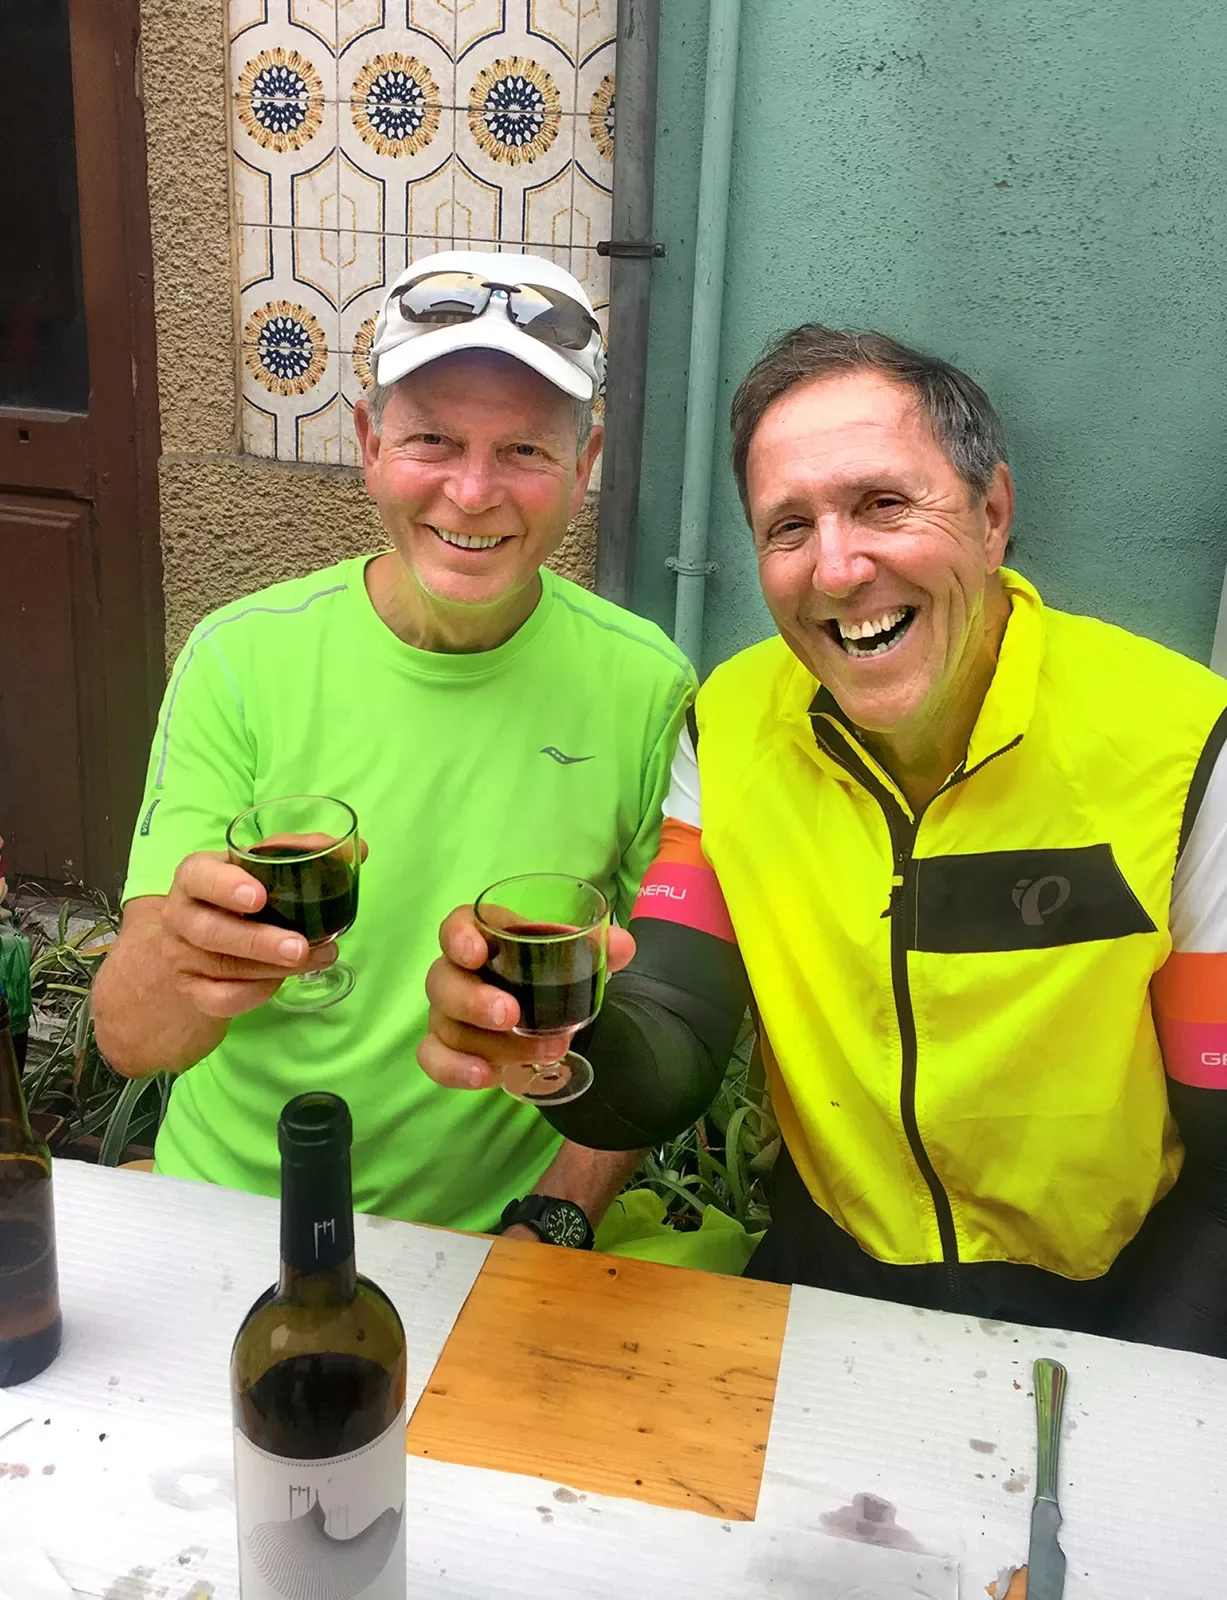 Two bikers saying cheers with glasses of red wine.